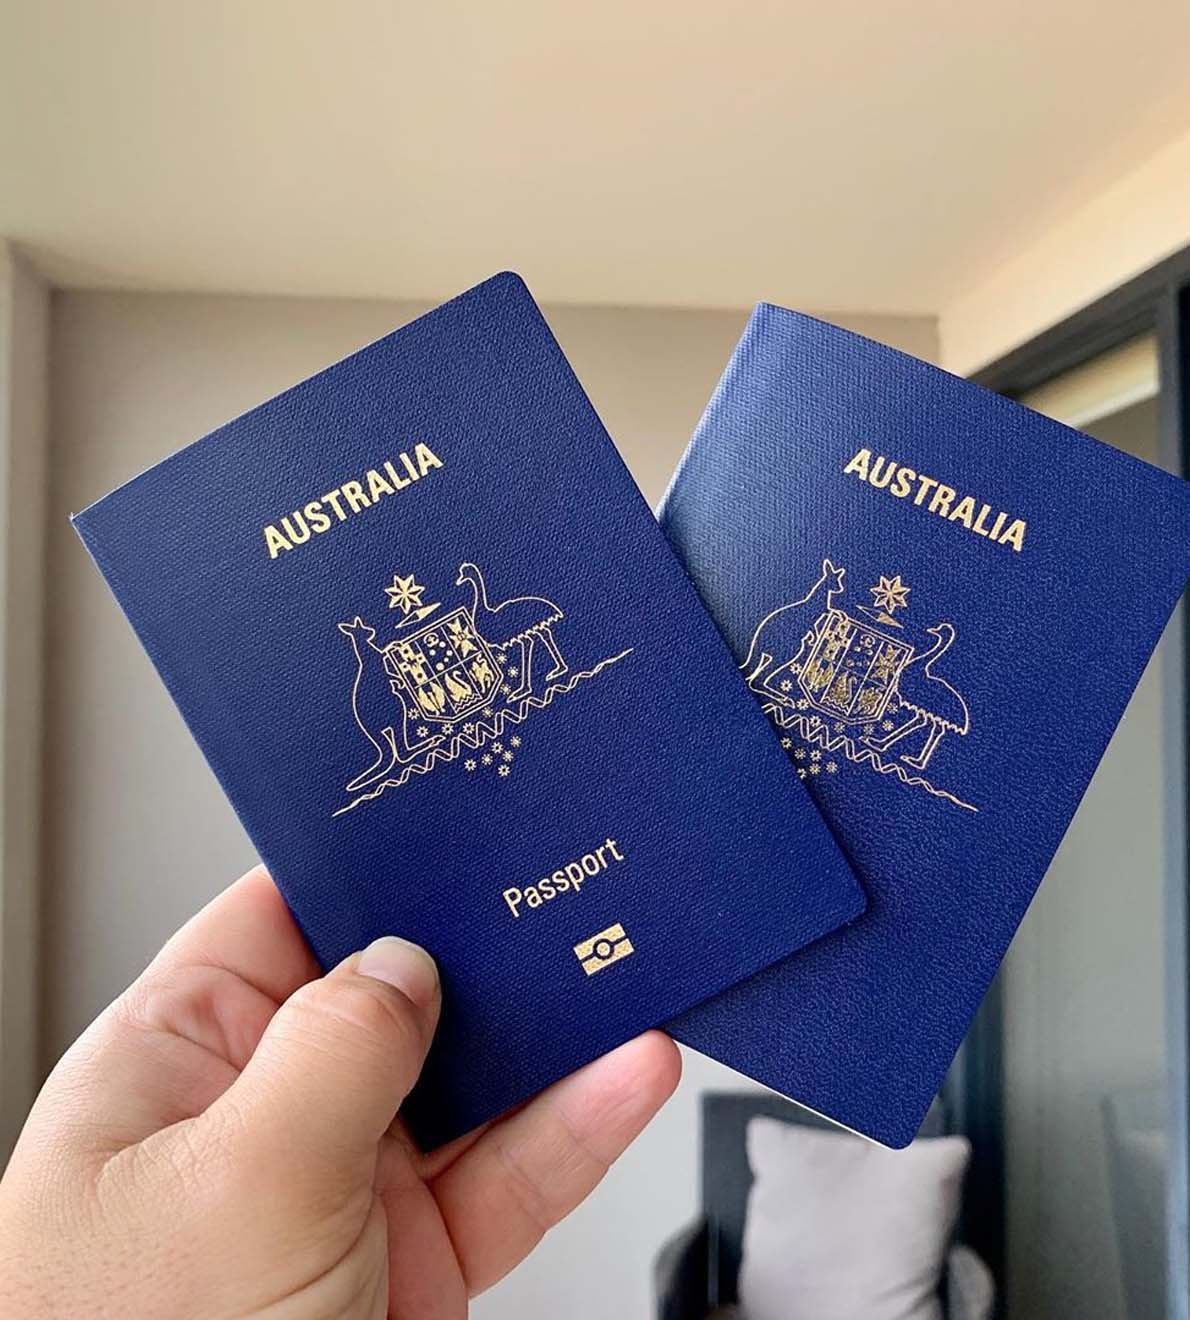 Image of passports, representing the identity verification process discussed in the FAQs on Ash Reynolds' wedding celebrant website.